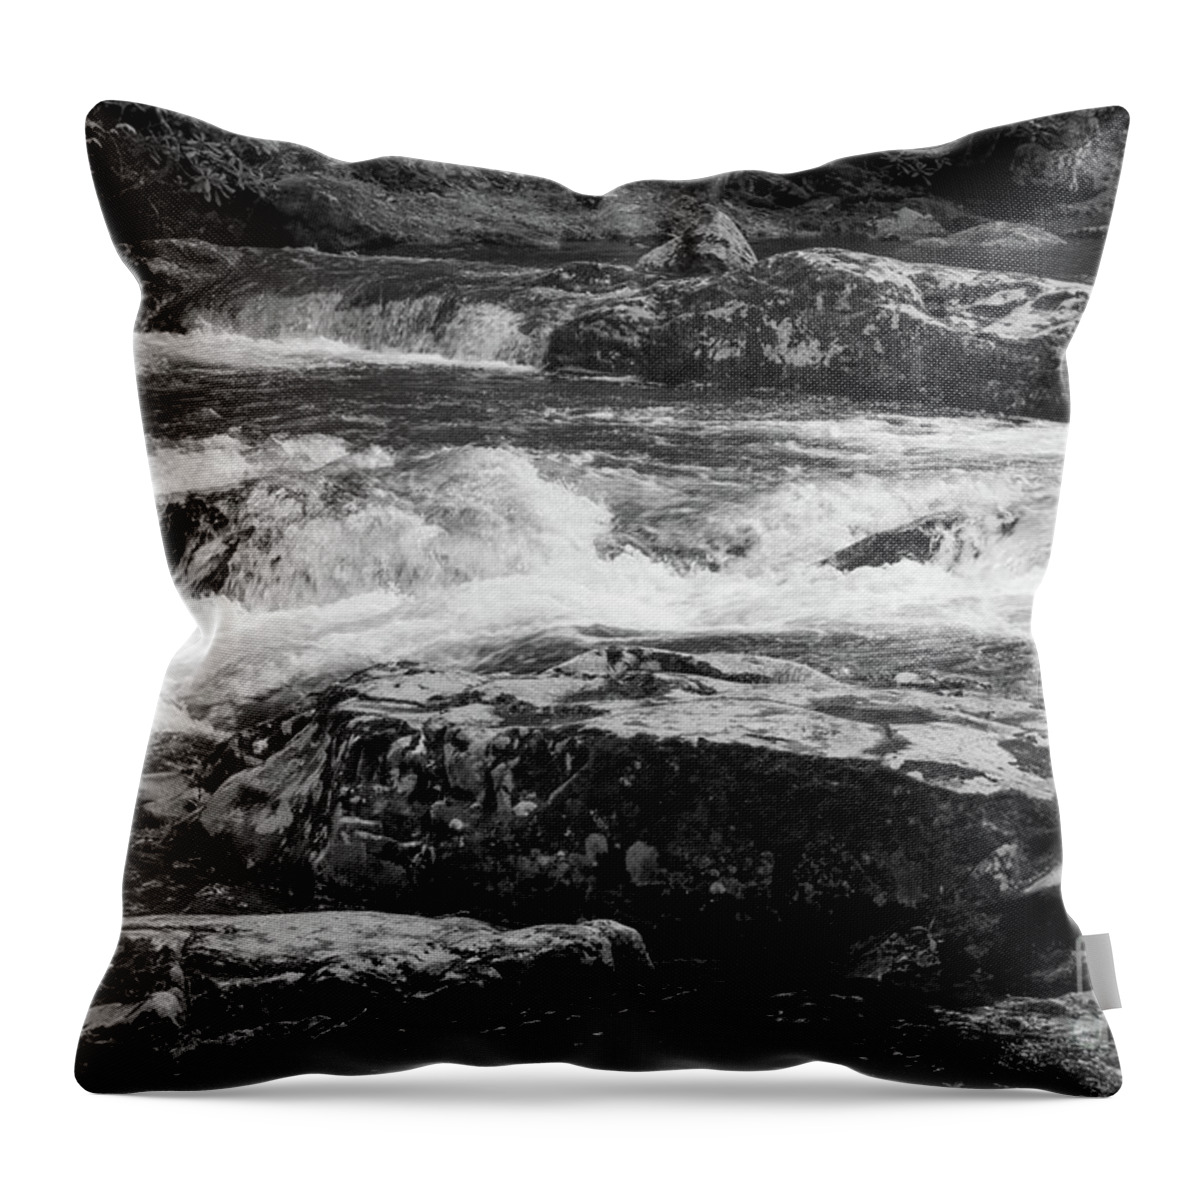 Little Pigeon River Throw Pillow featuring the photograph Little Pigeon River by Chris Scroggins